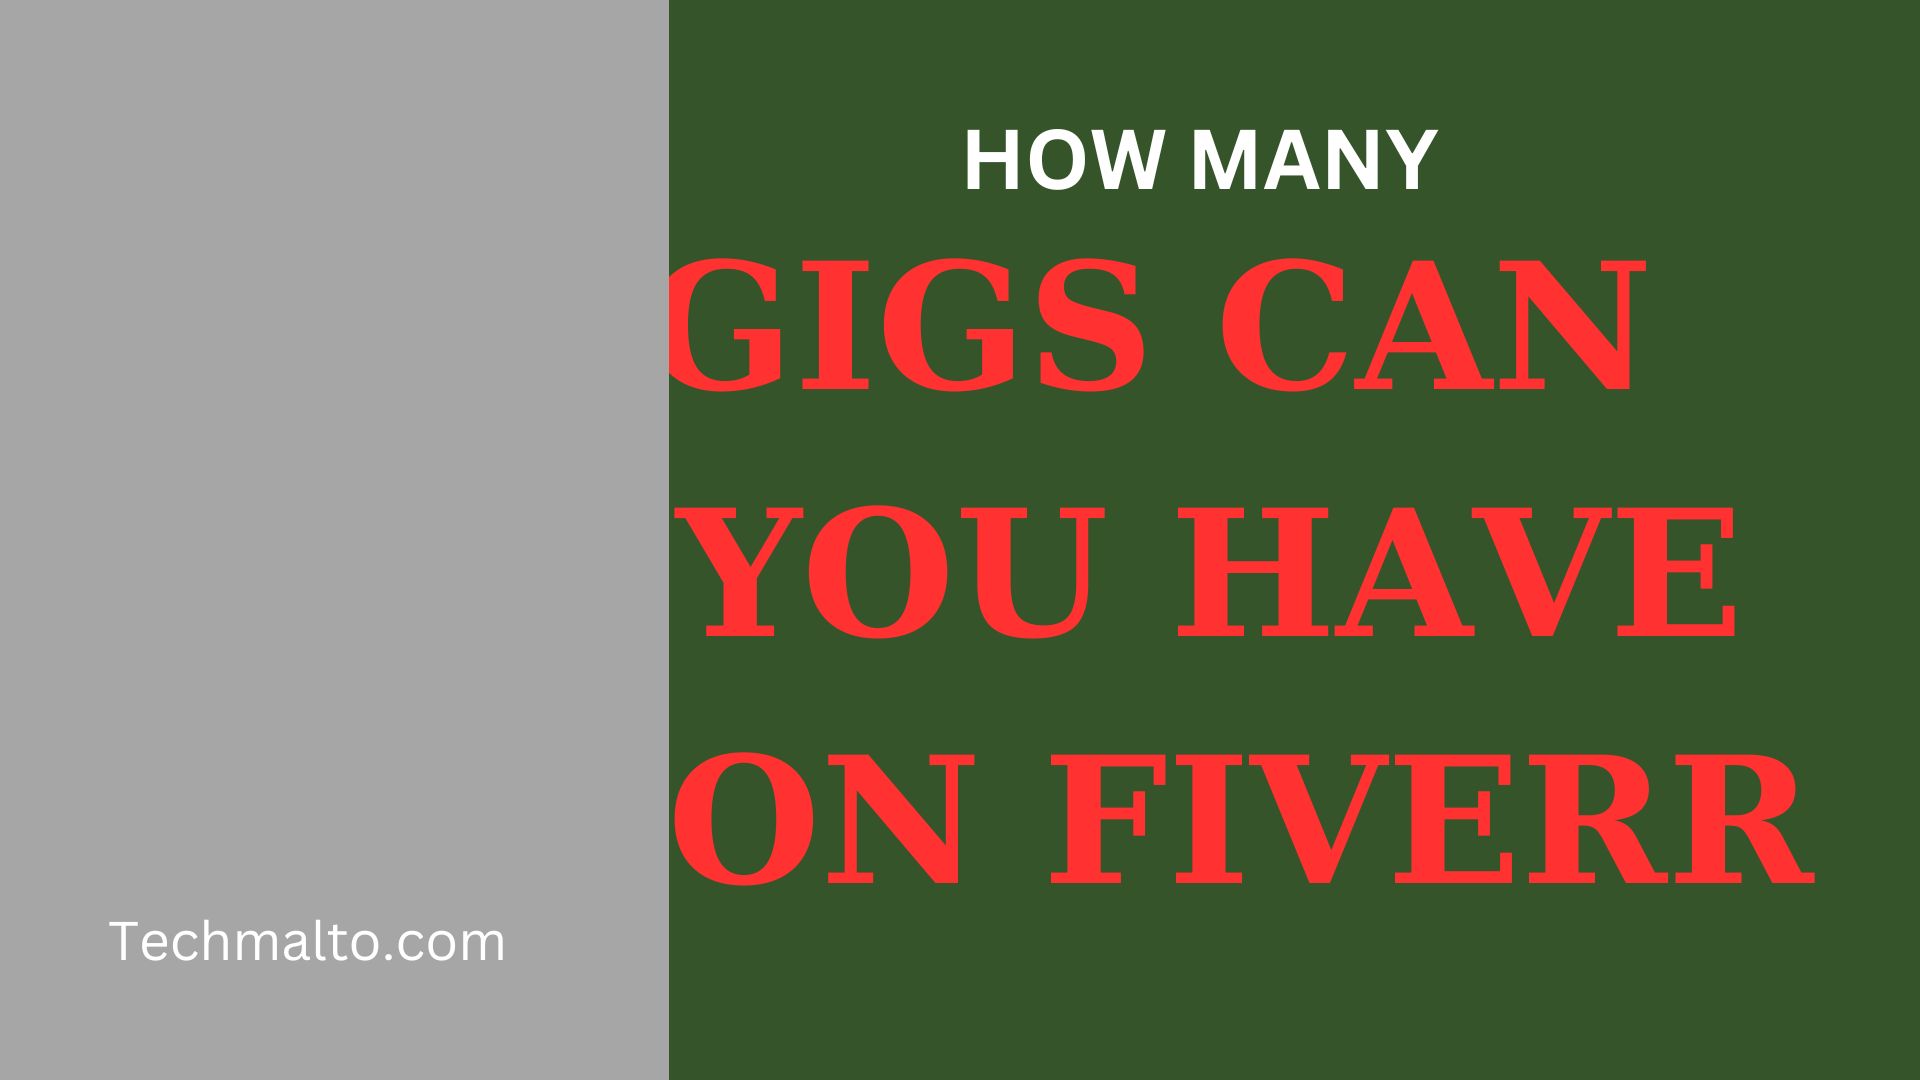 How many gigs can you have on fiverr